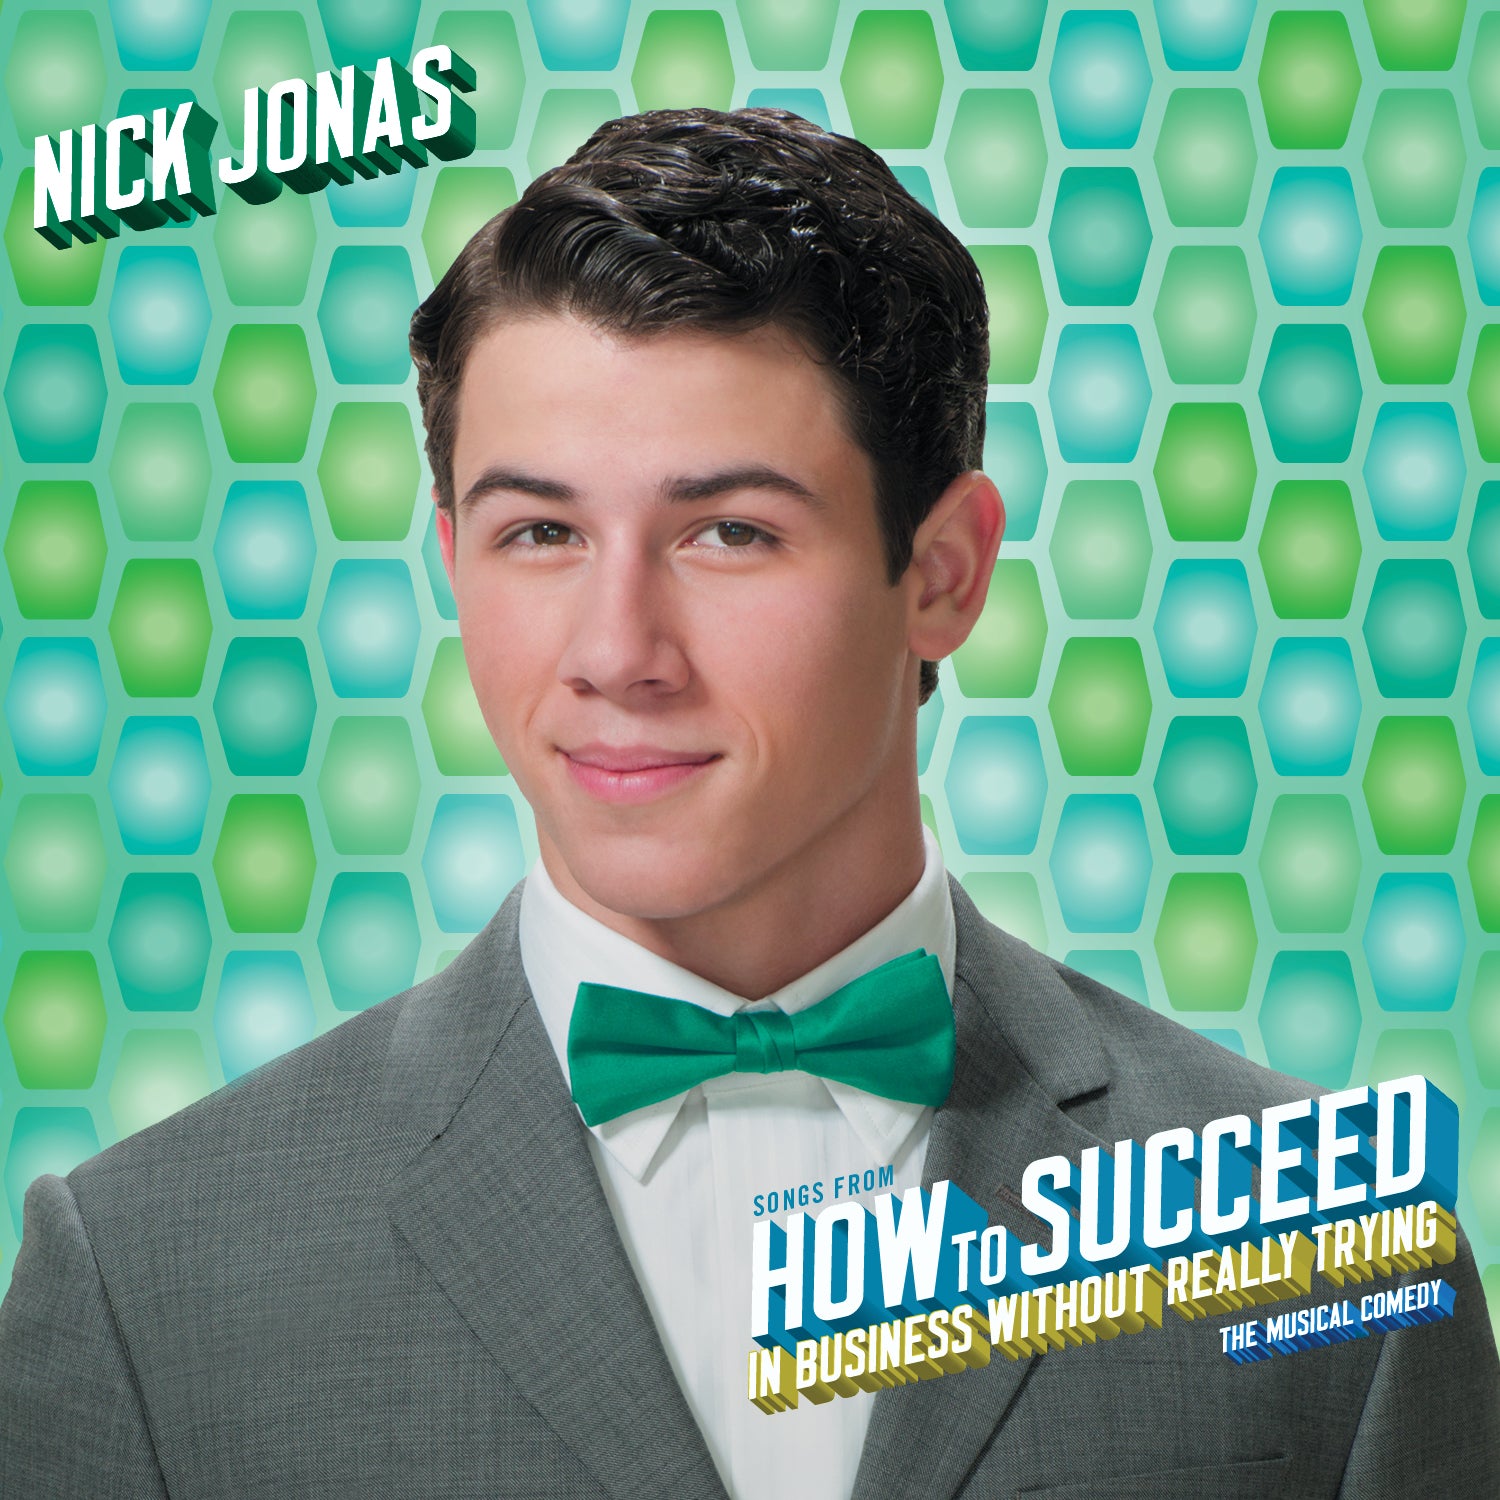 Nick Jonas: Songs From How To Succeed In Business Without Really Trying [CD]